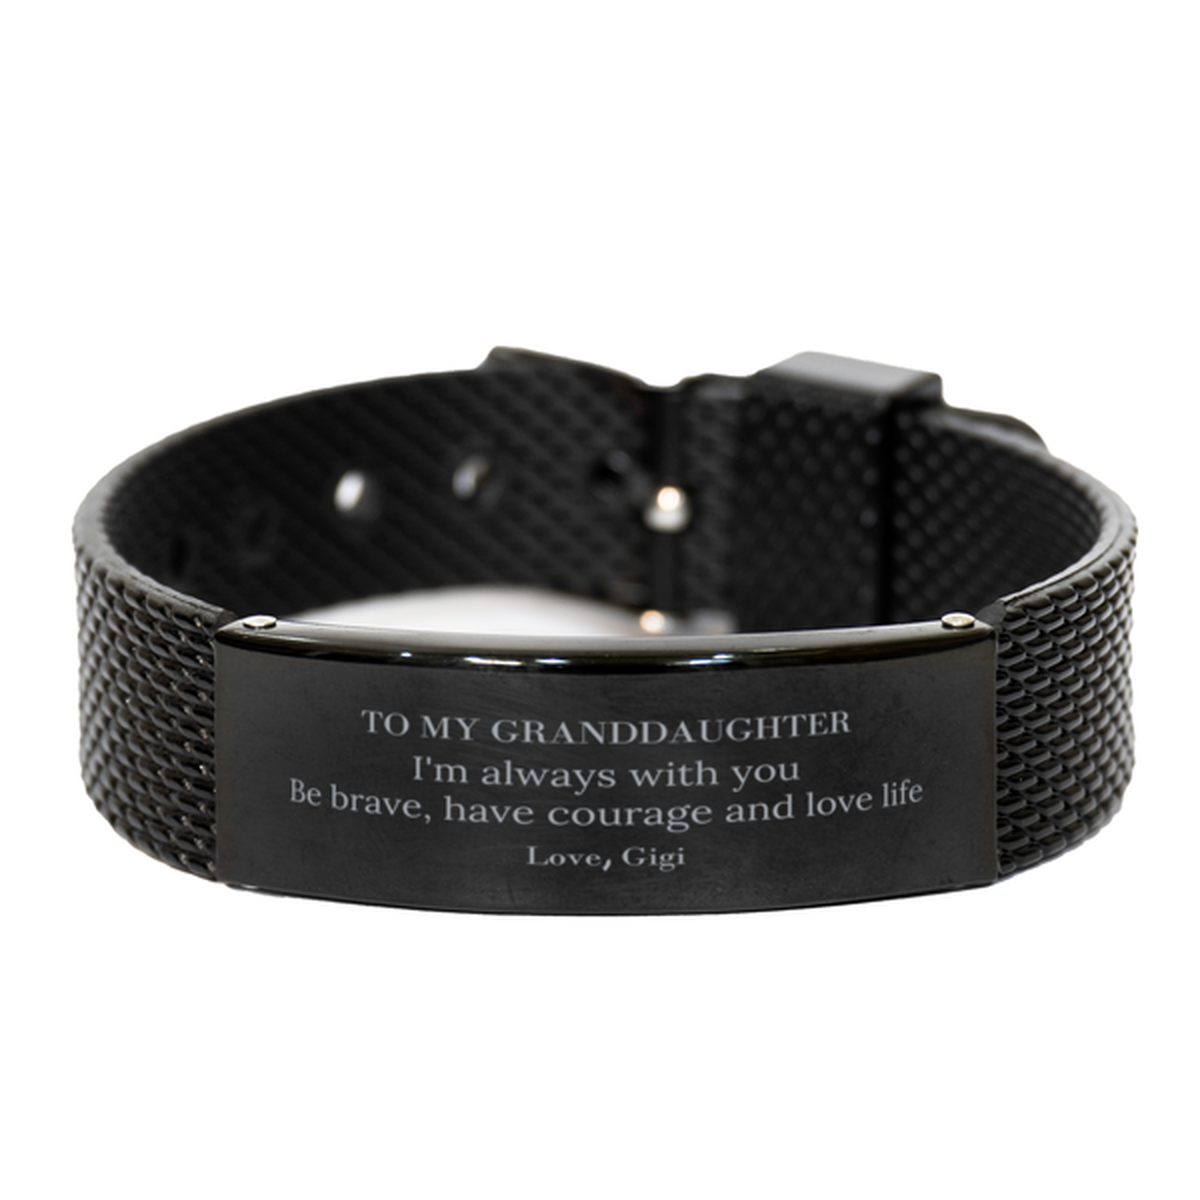 To My Granddaughter Gifts from Gigi, Unique Black Shark Mesh Bracelet Inspirational Christmas Birthday Graduation Gifts for Granddaughter I'm always with you. Be brave, have courage and love life. Love, Gigi